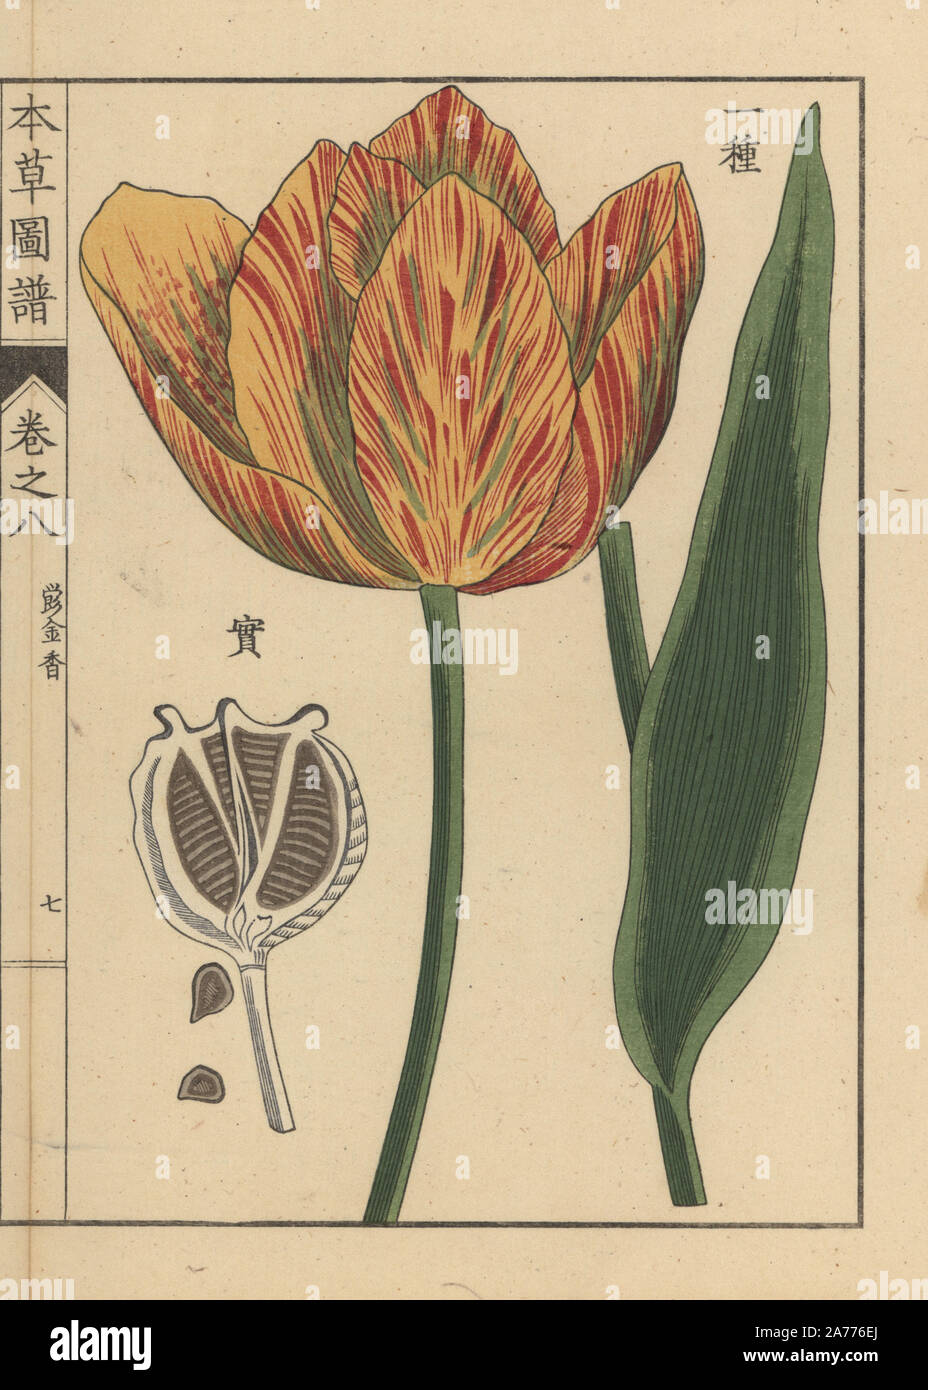 Tulip, Tulipa gesneria L. Colour-printed woodblock engraving by Kan'en Iwasaki from 'Honzo Zufu,' an Illustrated Guide to Medicinal Plants, Japan, 1884. Iwasaki (1786-1842) was a Japanese botanist, entomologist and zoologist. He was one of the first Japanese botanists to incorporate western knowledge into his studies. Stock Photo